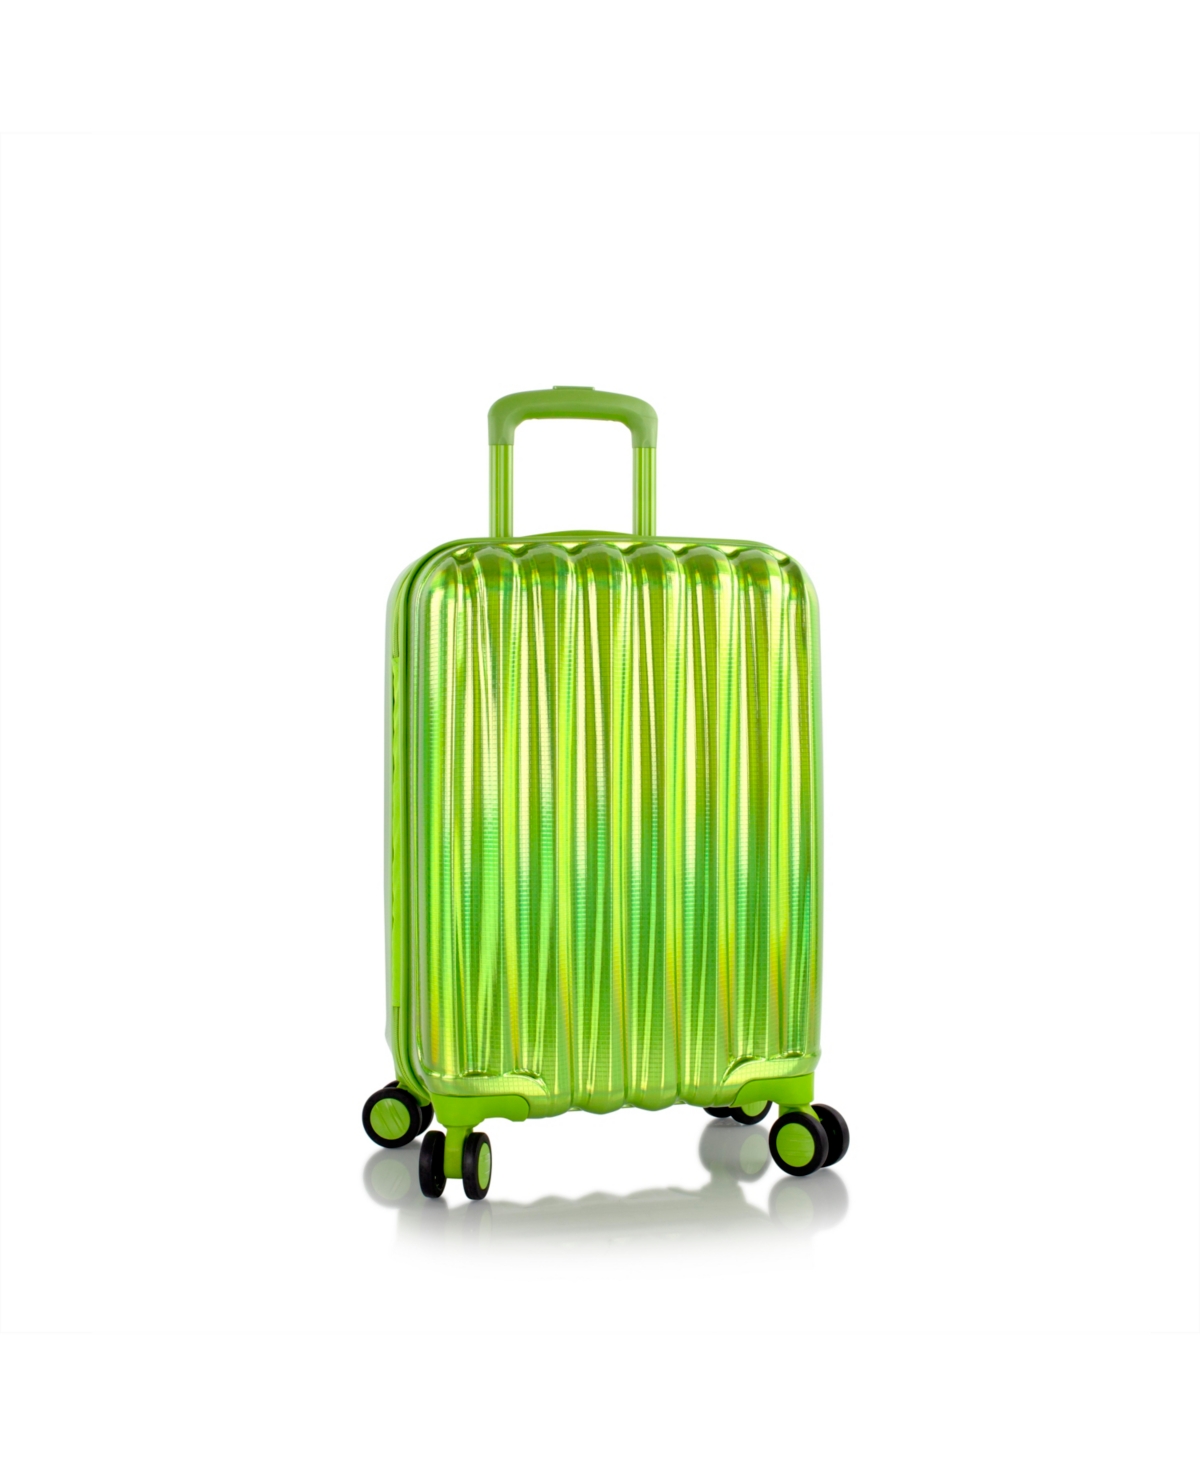 Heys Astro 21" Hardside Carry-on Spinner Luggage In Green